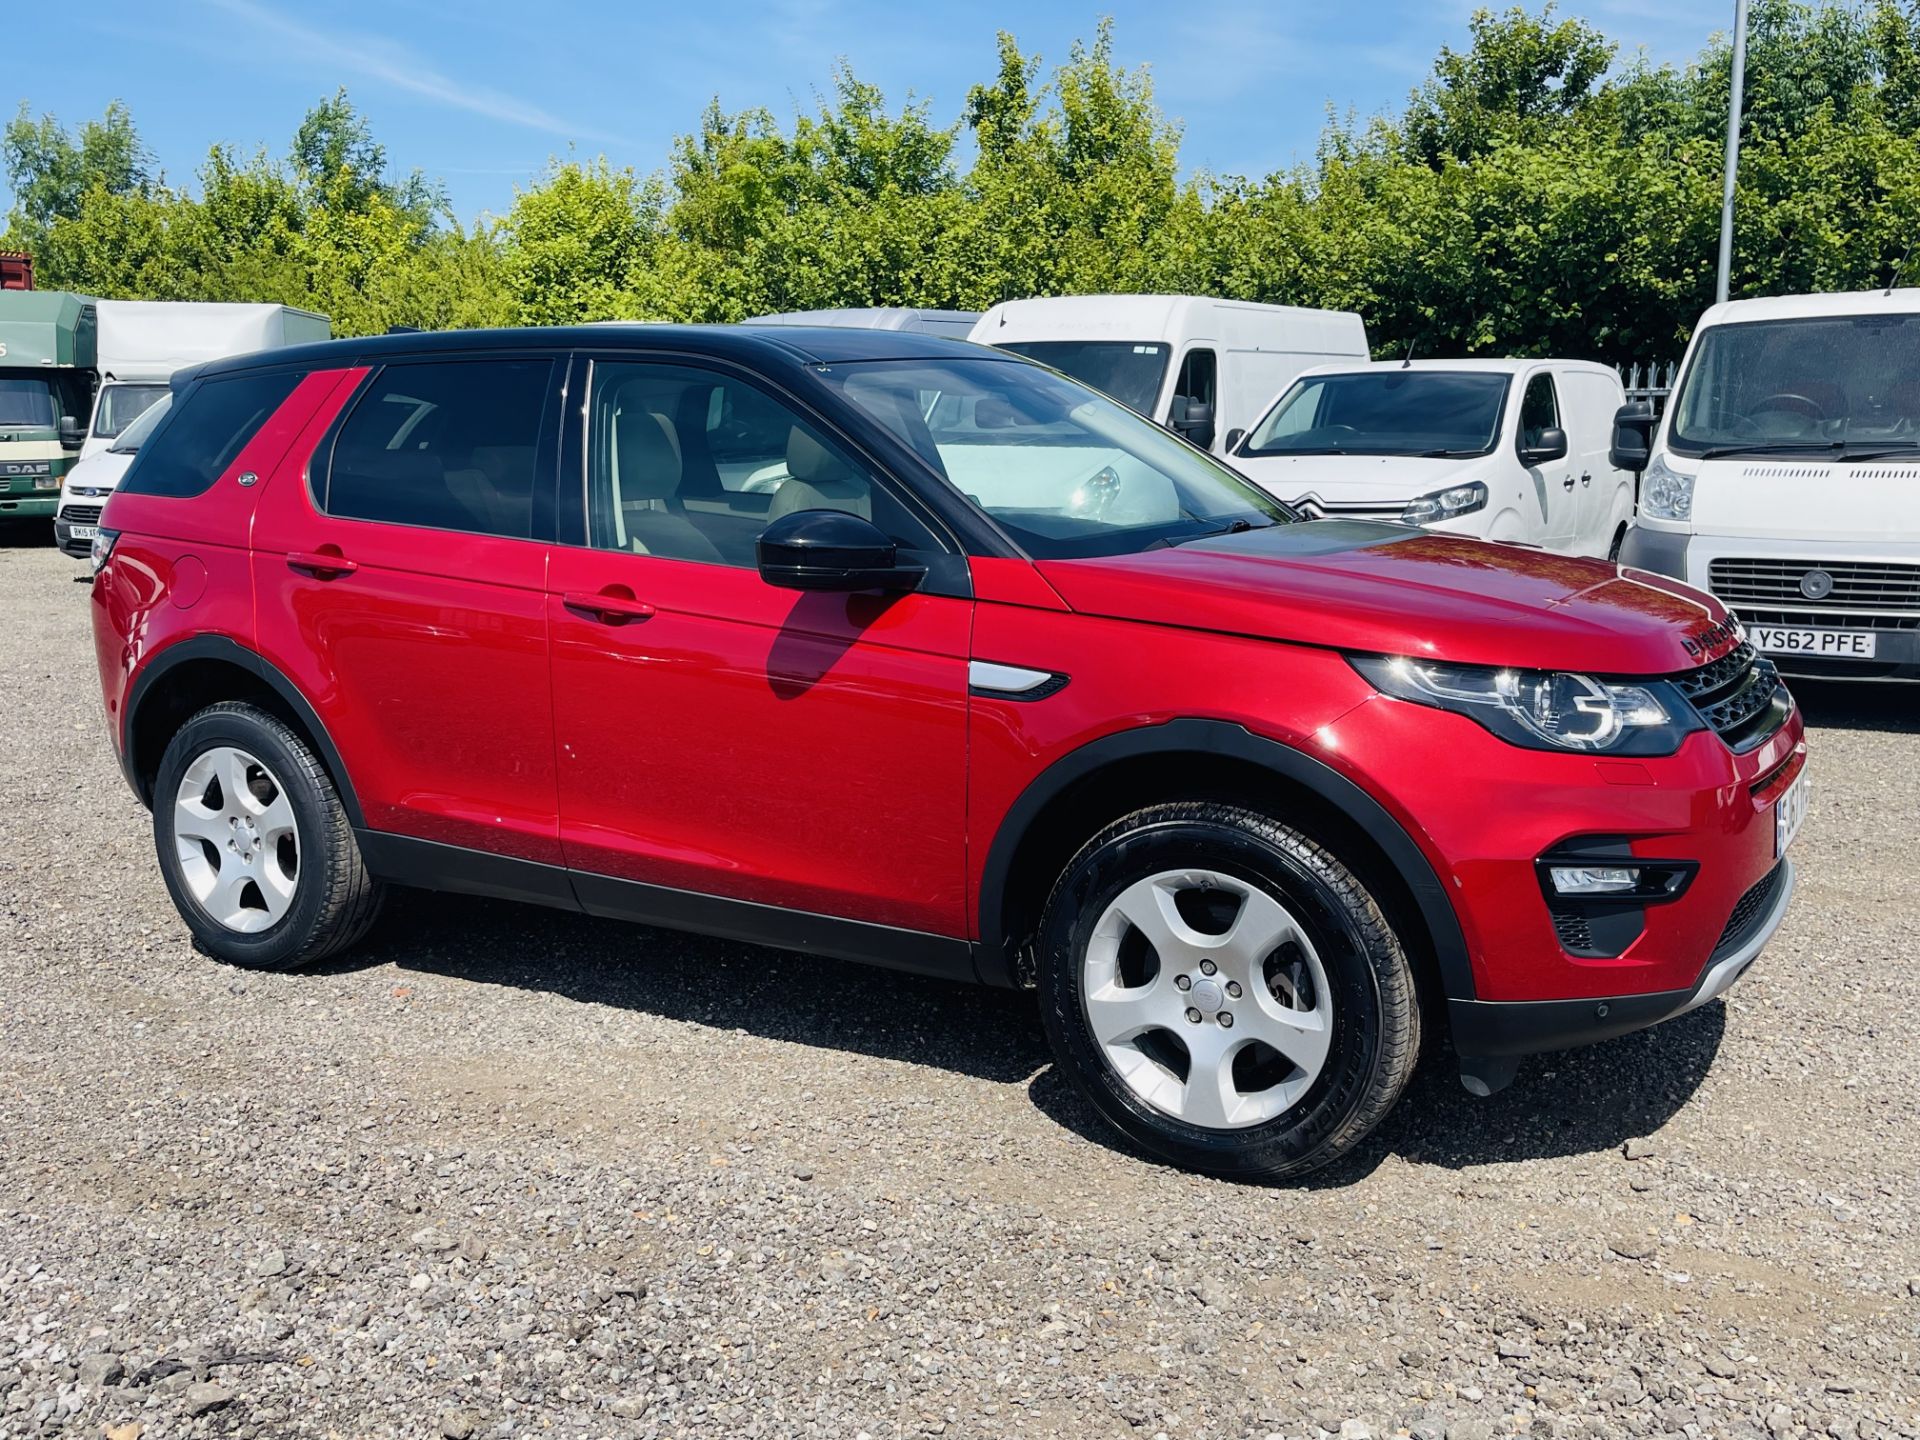 Land Rover Discovery Sport HSE 2.0 ED4 2017 '67 Reg' Sat Nav - Panoramic Glass Roof - ULEZ Compliant - Image 15 of 33